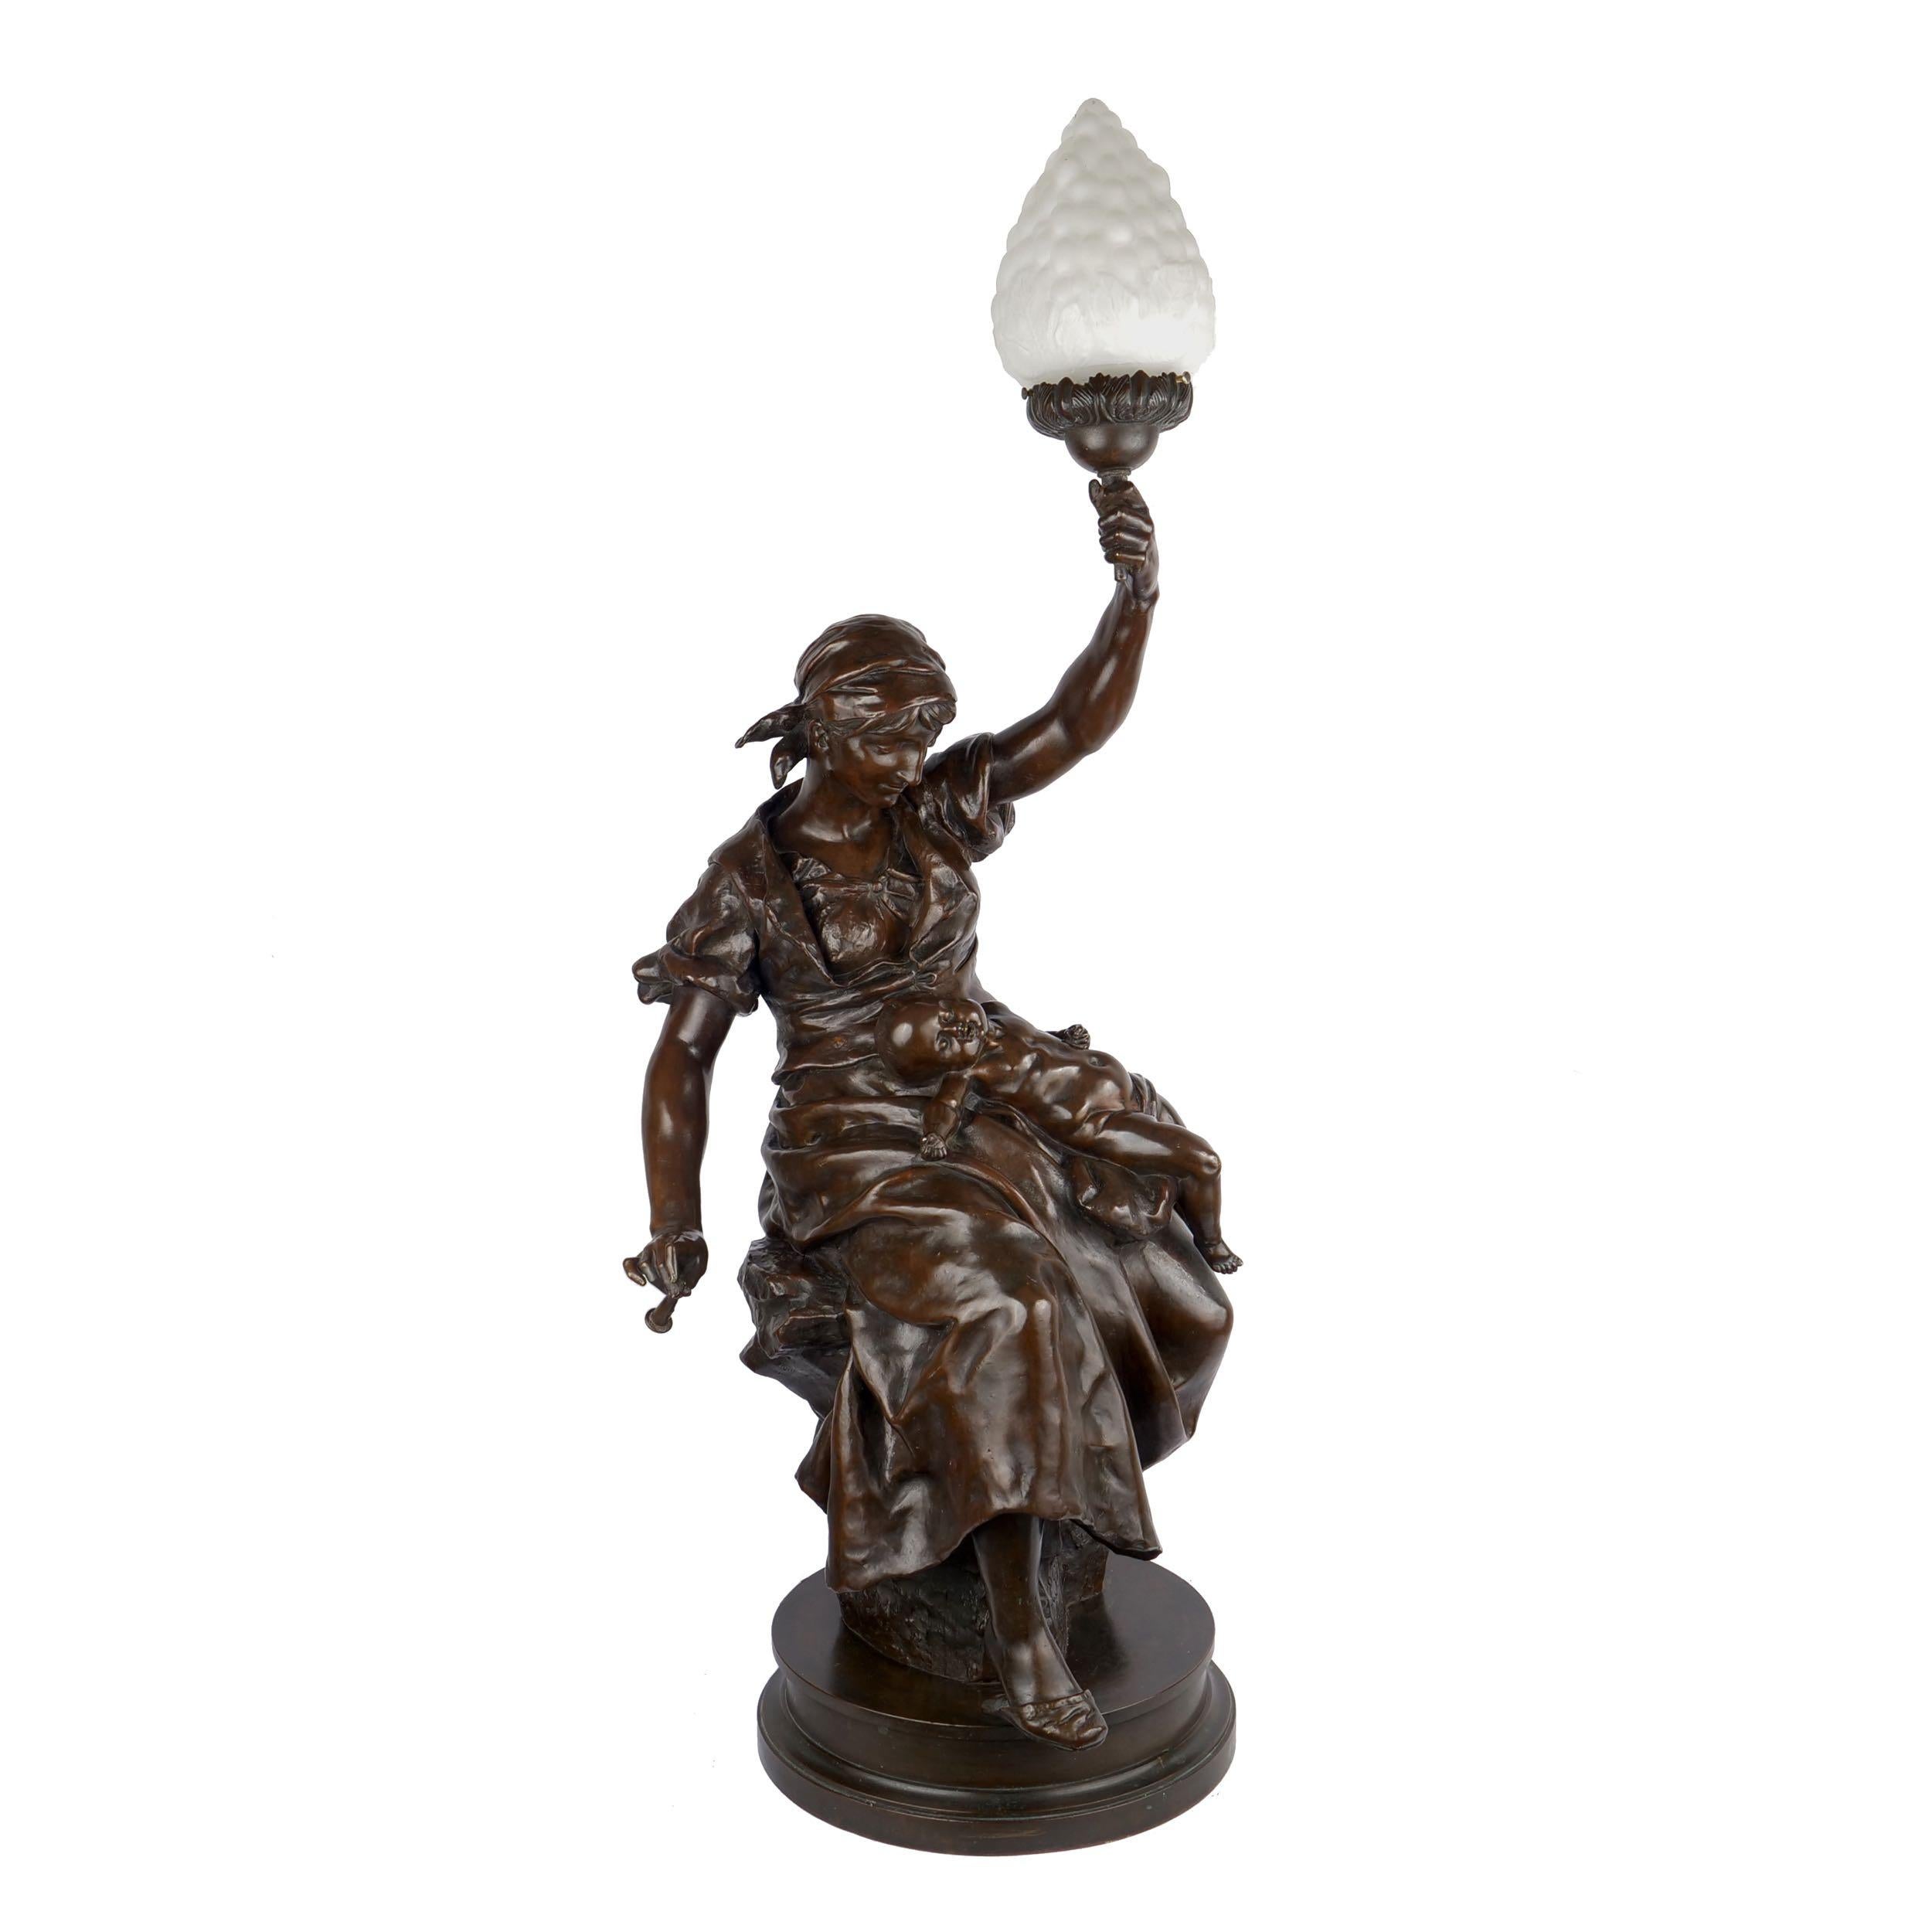 A very large work that captures the attention of the viewer immediately, this is a piece that was intended for display in the corner on a large pedestal, allowing the lamp to bring highlight to the sculpture. 

It was sculpted in two versions and